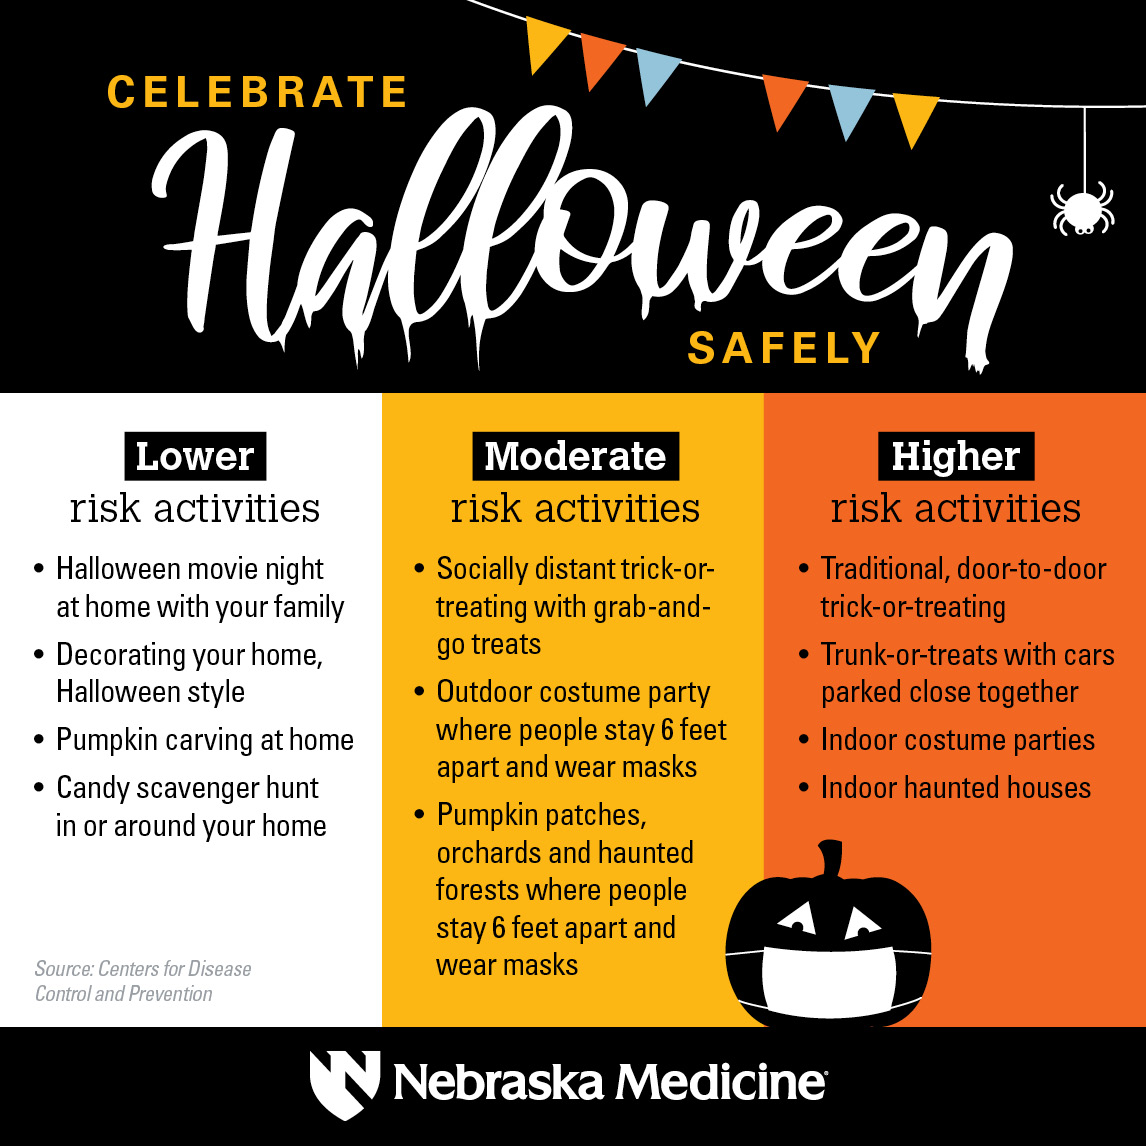 Top Safety Tips for Candy Making